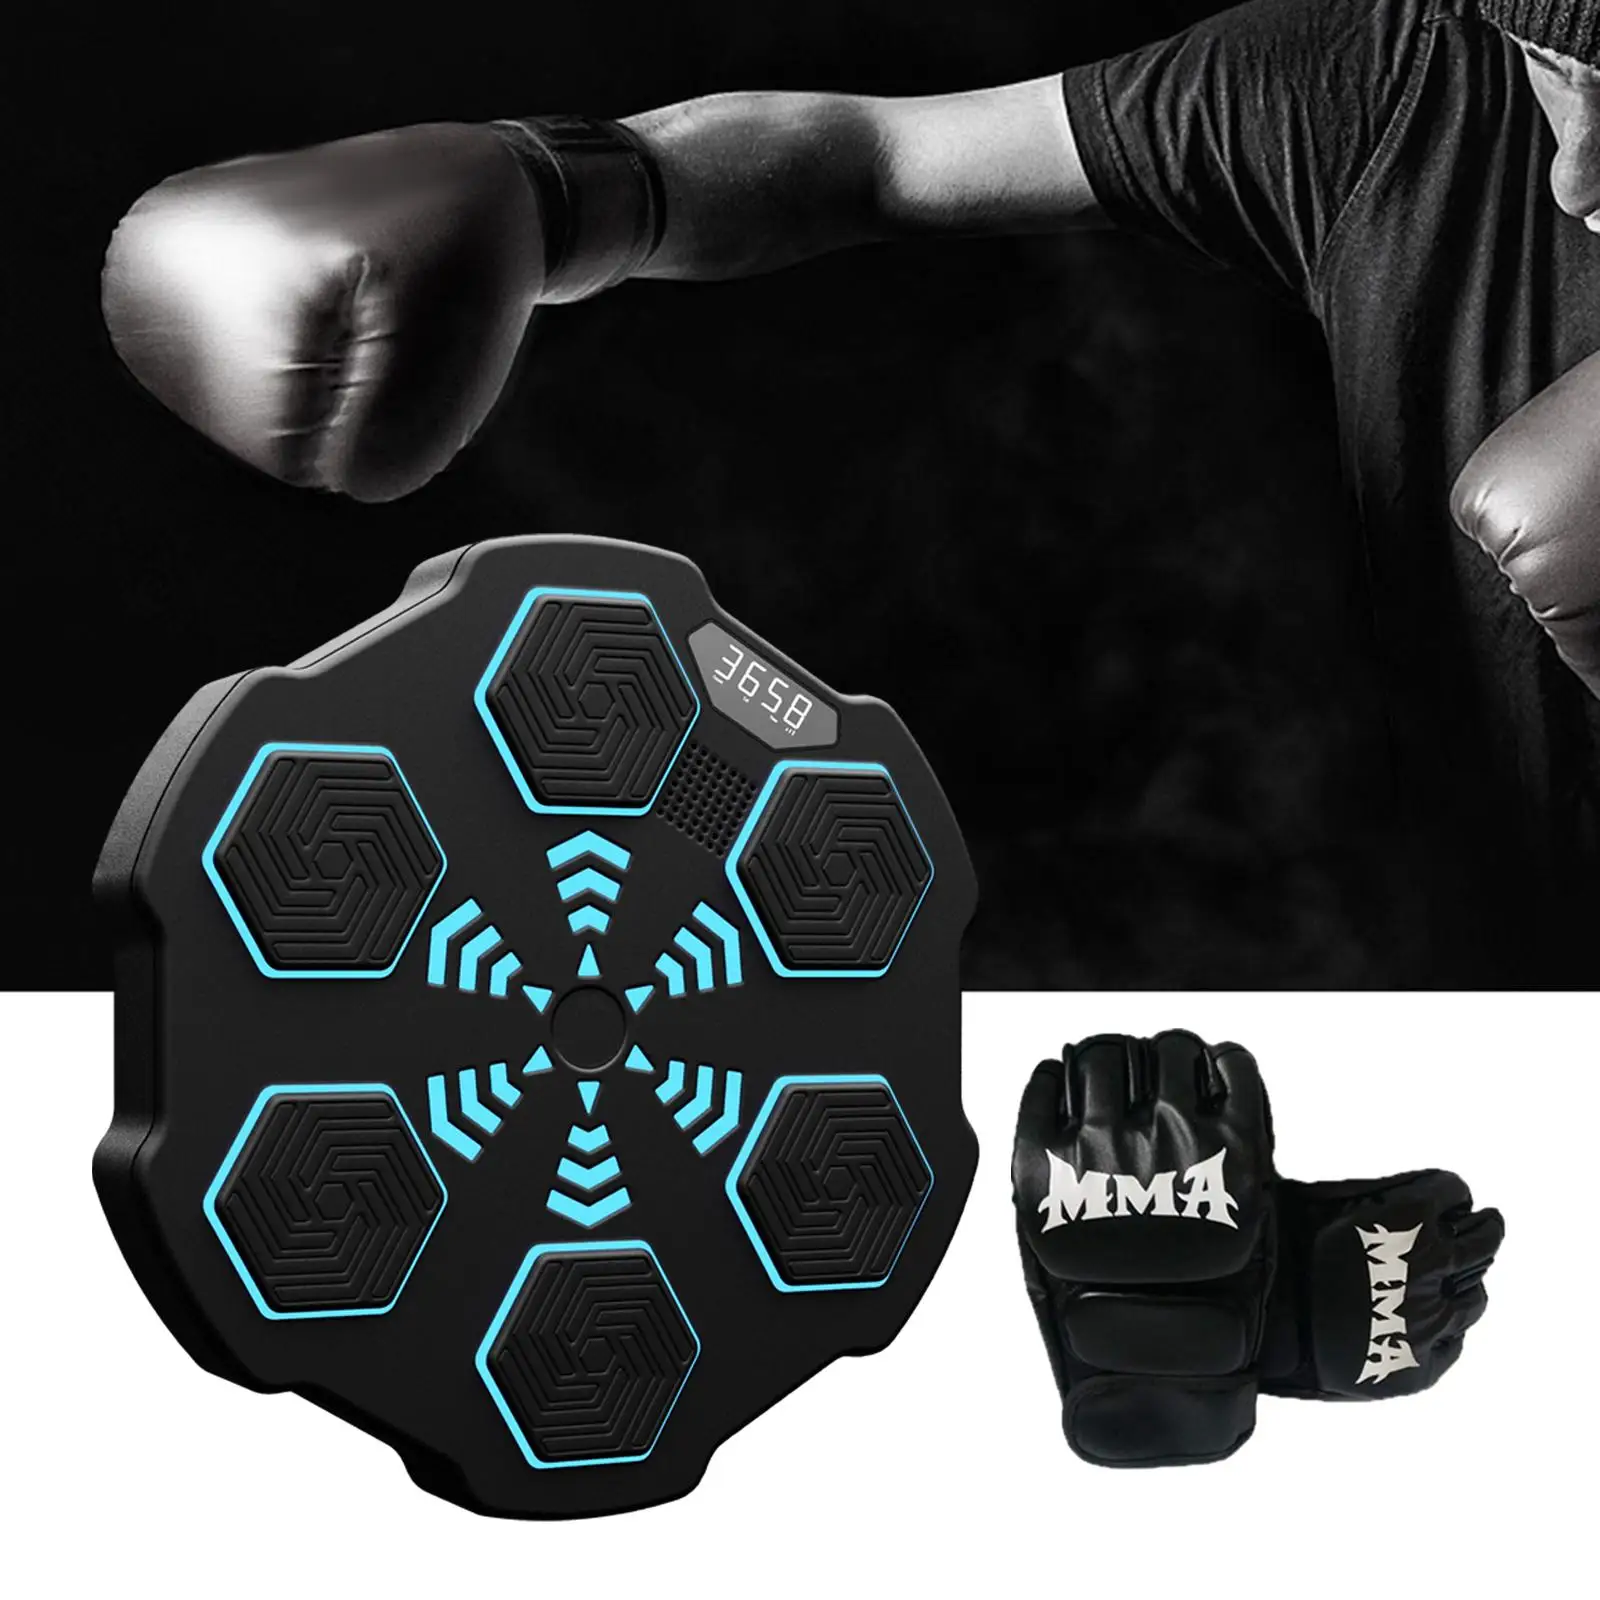 Electronic Wall Target Sandbag Music Boxing Machine with LED Lights for Competitions Trainer Practice Striking Skills Youth